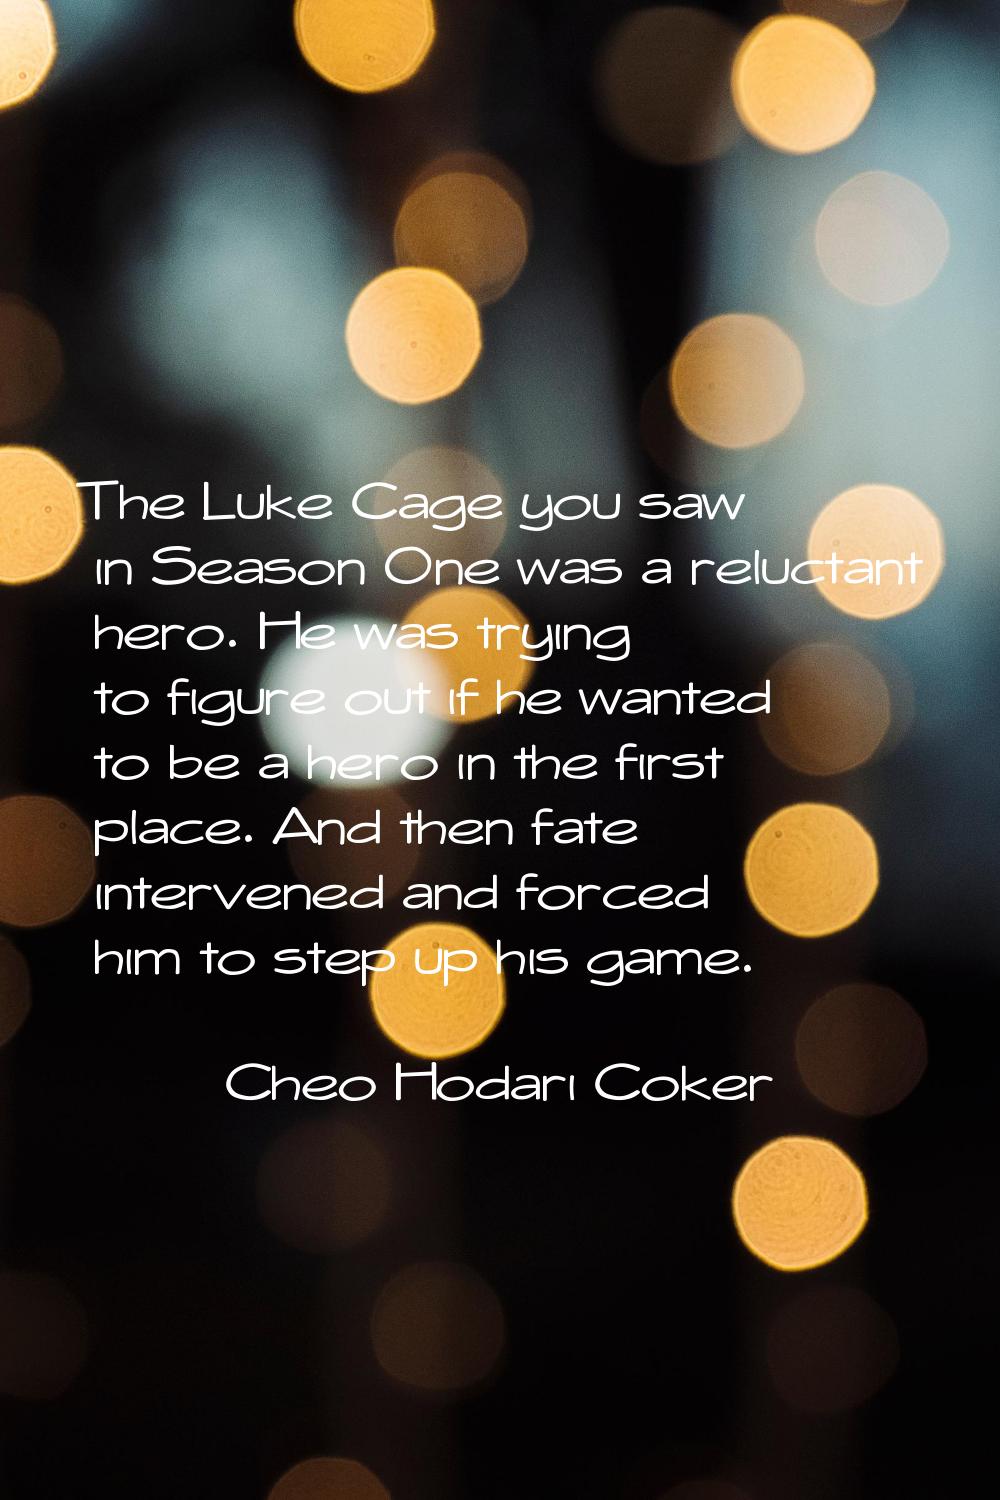 The Luke Cage you saw in Season One was a reluctant hero. He was trying to figure out if he wanted 